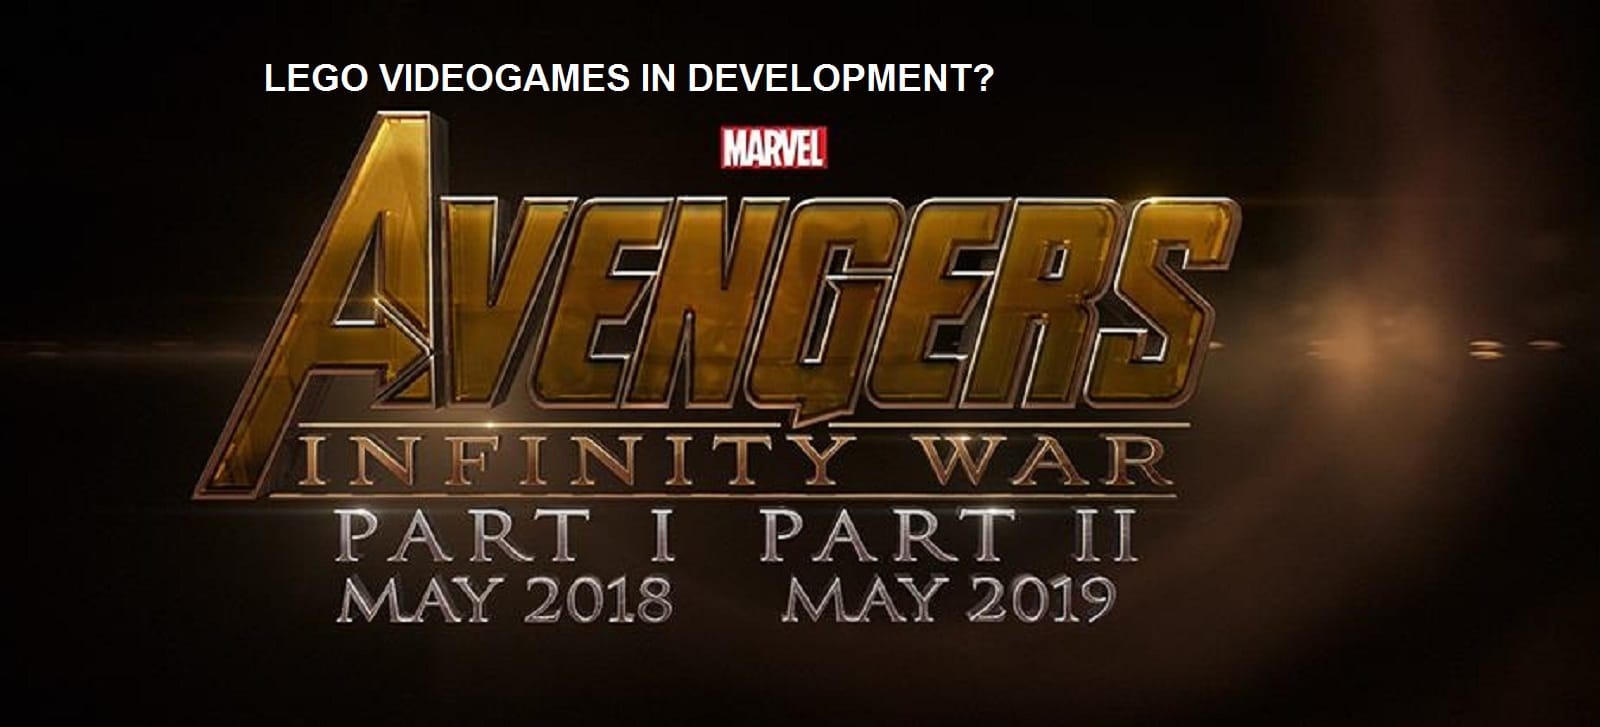 Lego Marvel Avengers Infinity War Part 1 and 2 Coming?